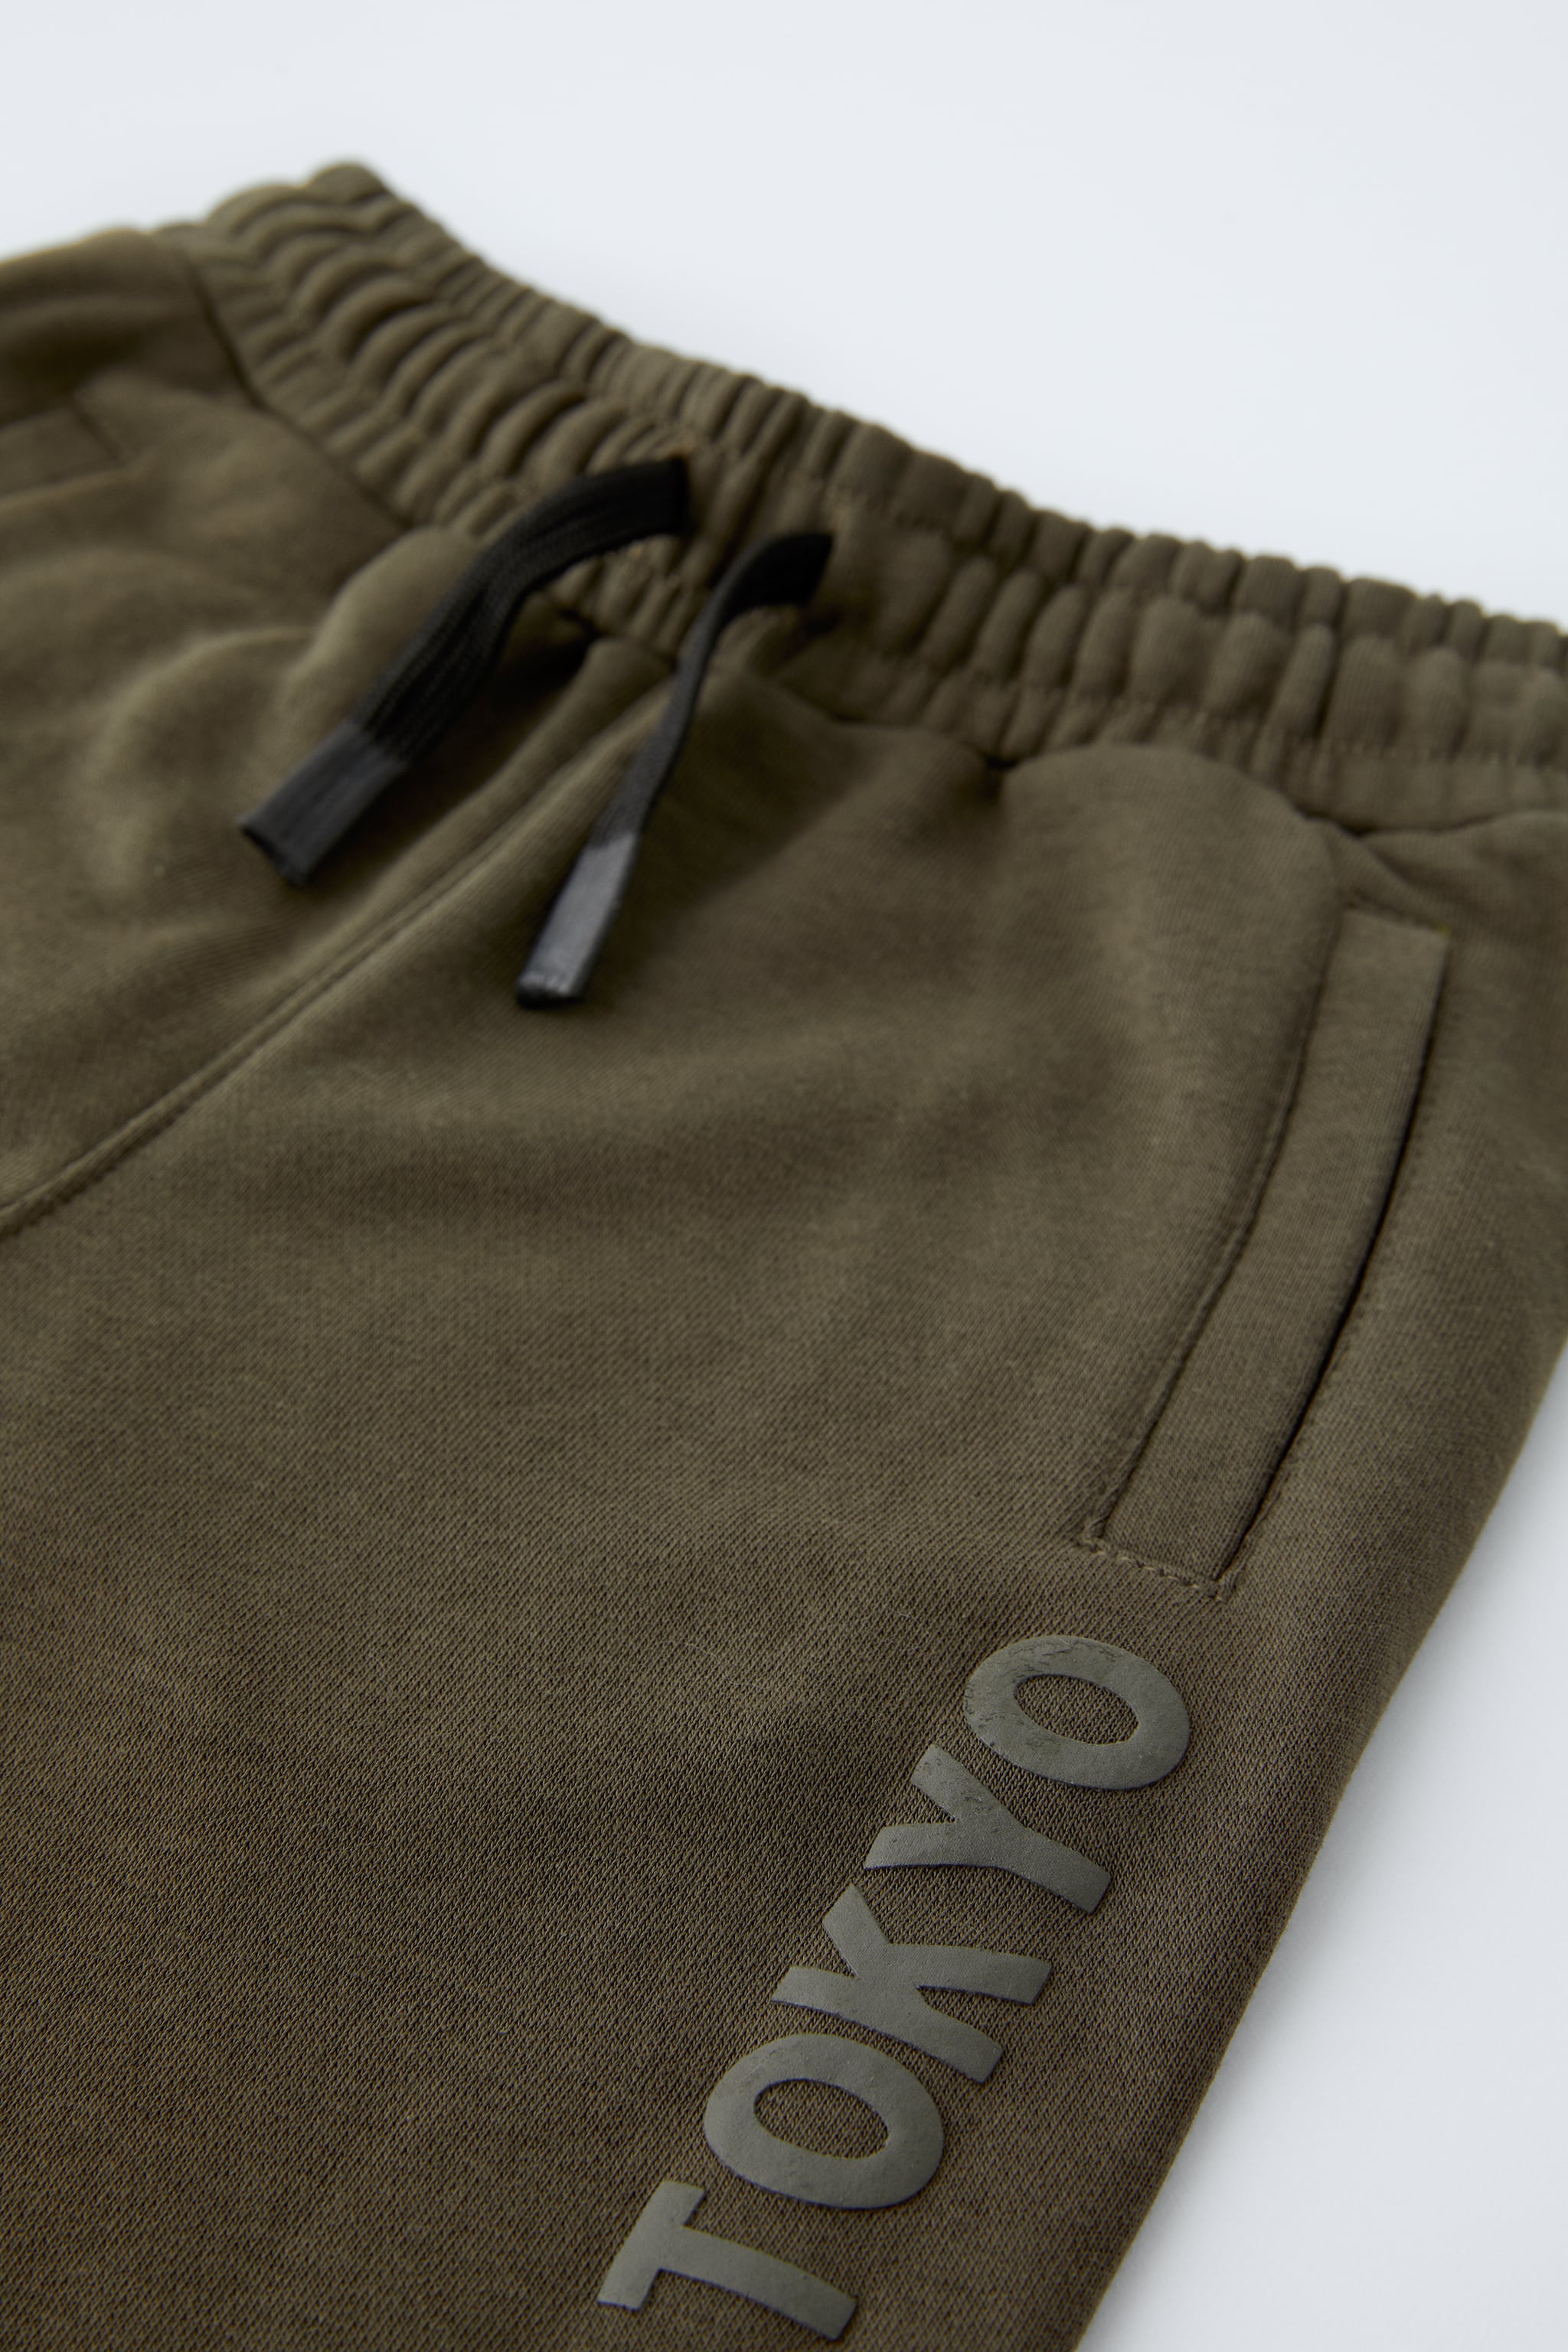 TEXT DETAIL ATHLETIC JOGGERS